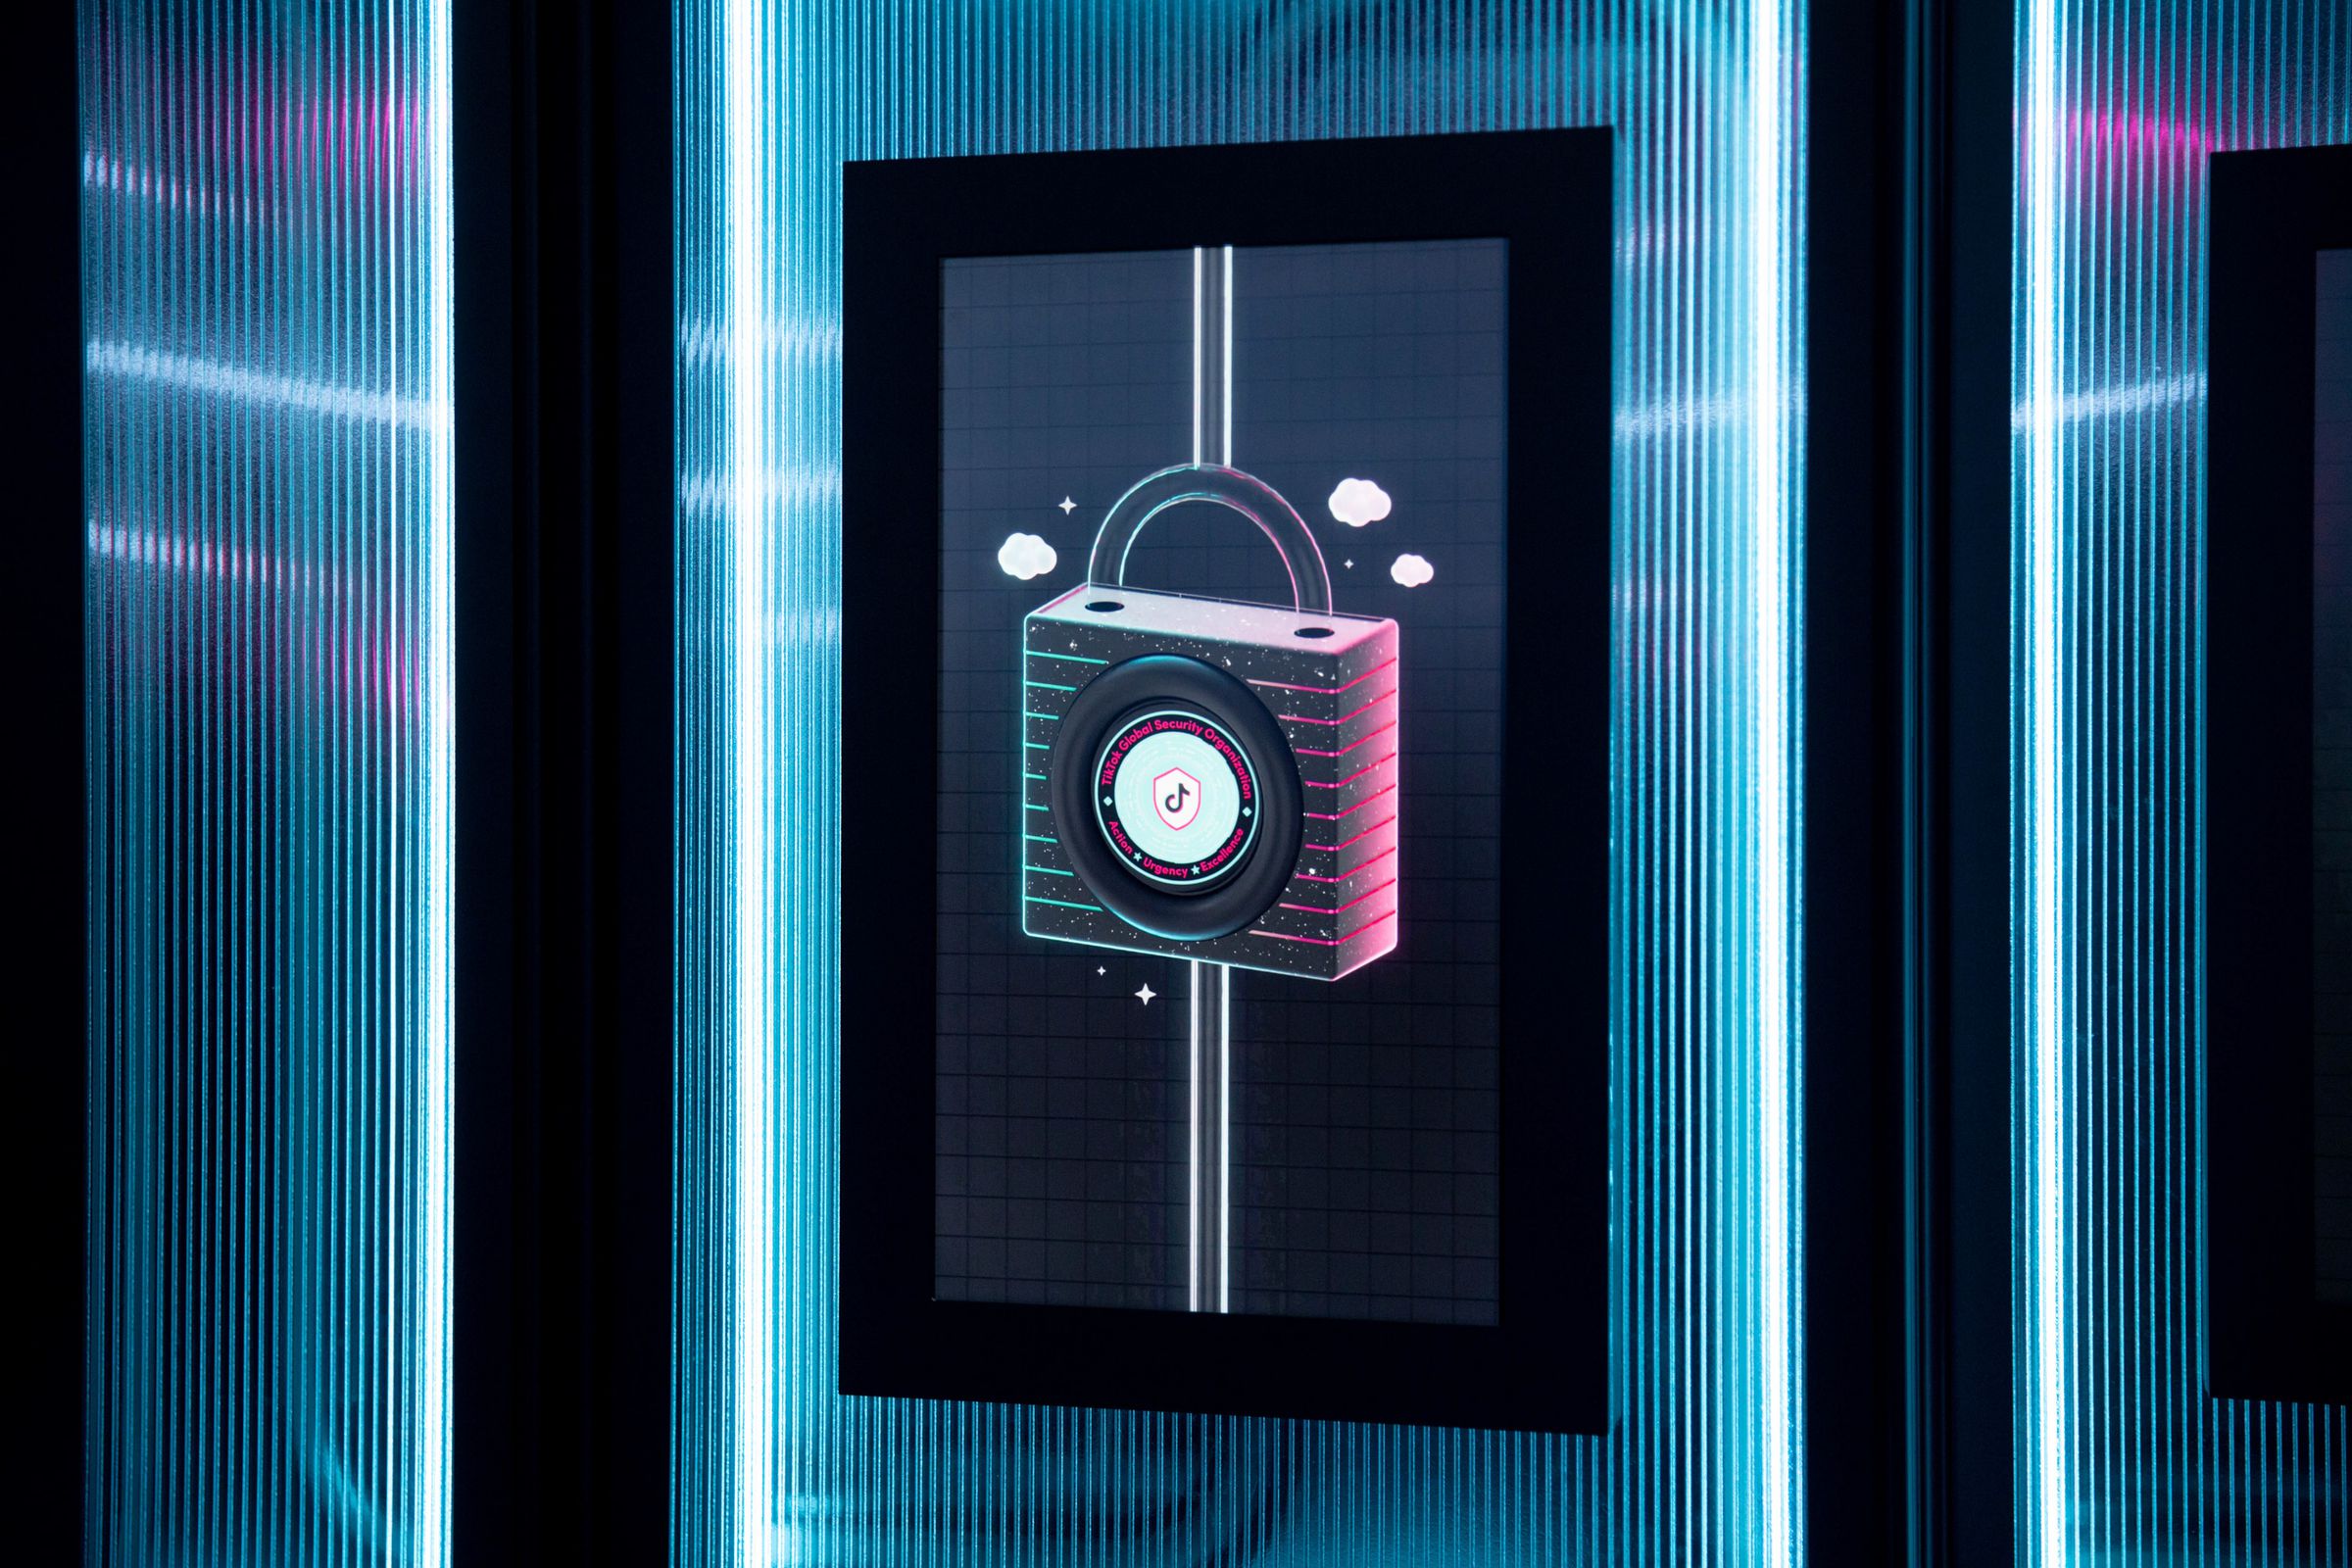 One of the displays inside TikTok’s Transparency and Accountability Center in Los Angeles.